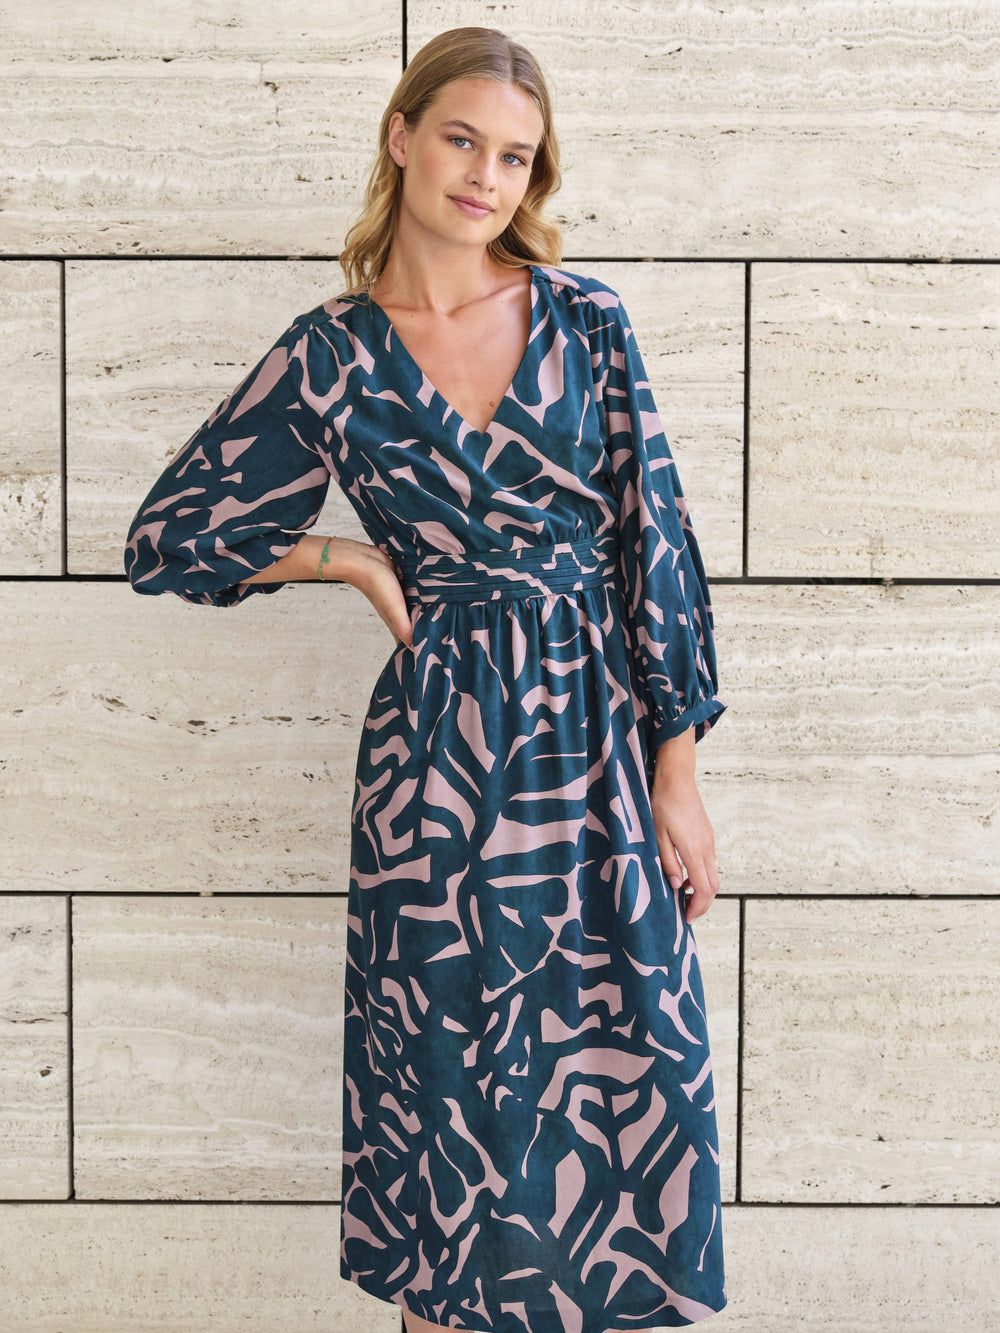 Women wearing the Alana Dress sewing pattern from Atelier Jupe on The Fold Line. A dress pattern made in viscose, cotton, tencel, linen, double gauze or non-static polyester fabrics, featuring a low V-neck, wide 7/8th sleeves, gathered skirt, small pleats